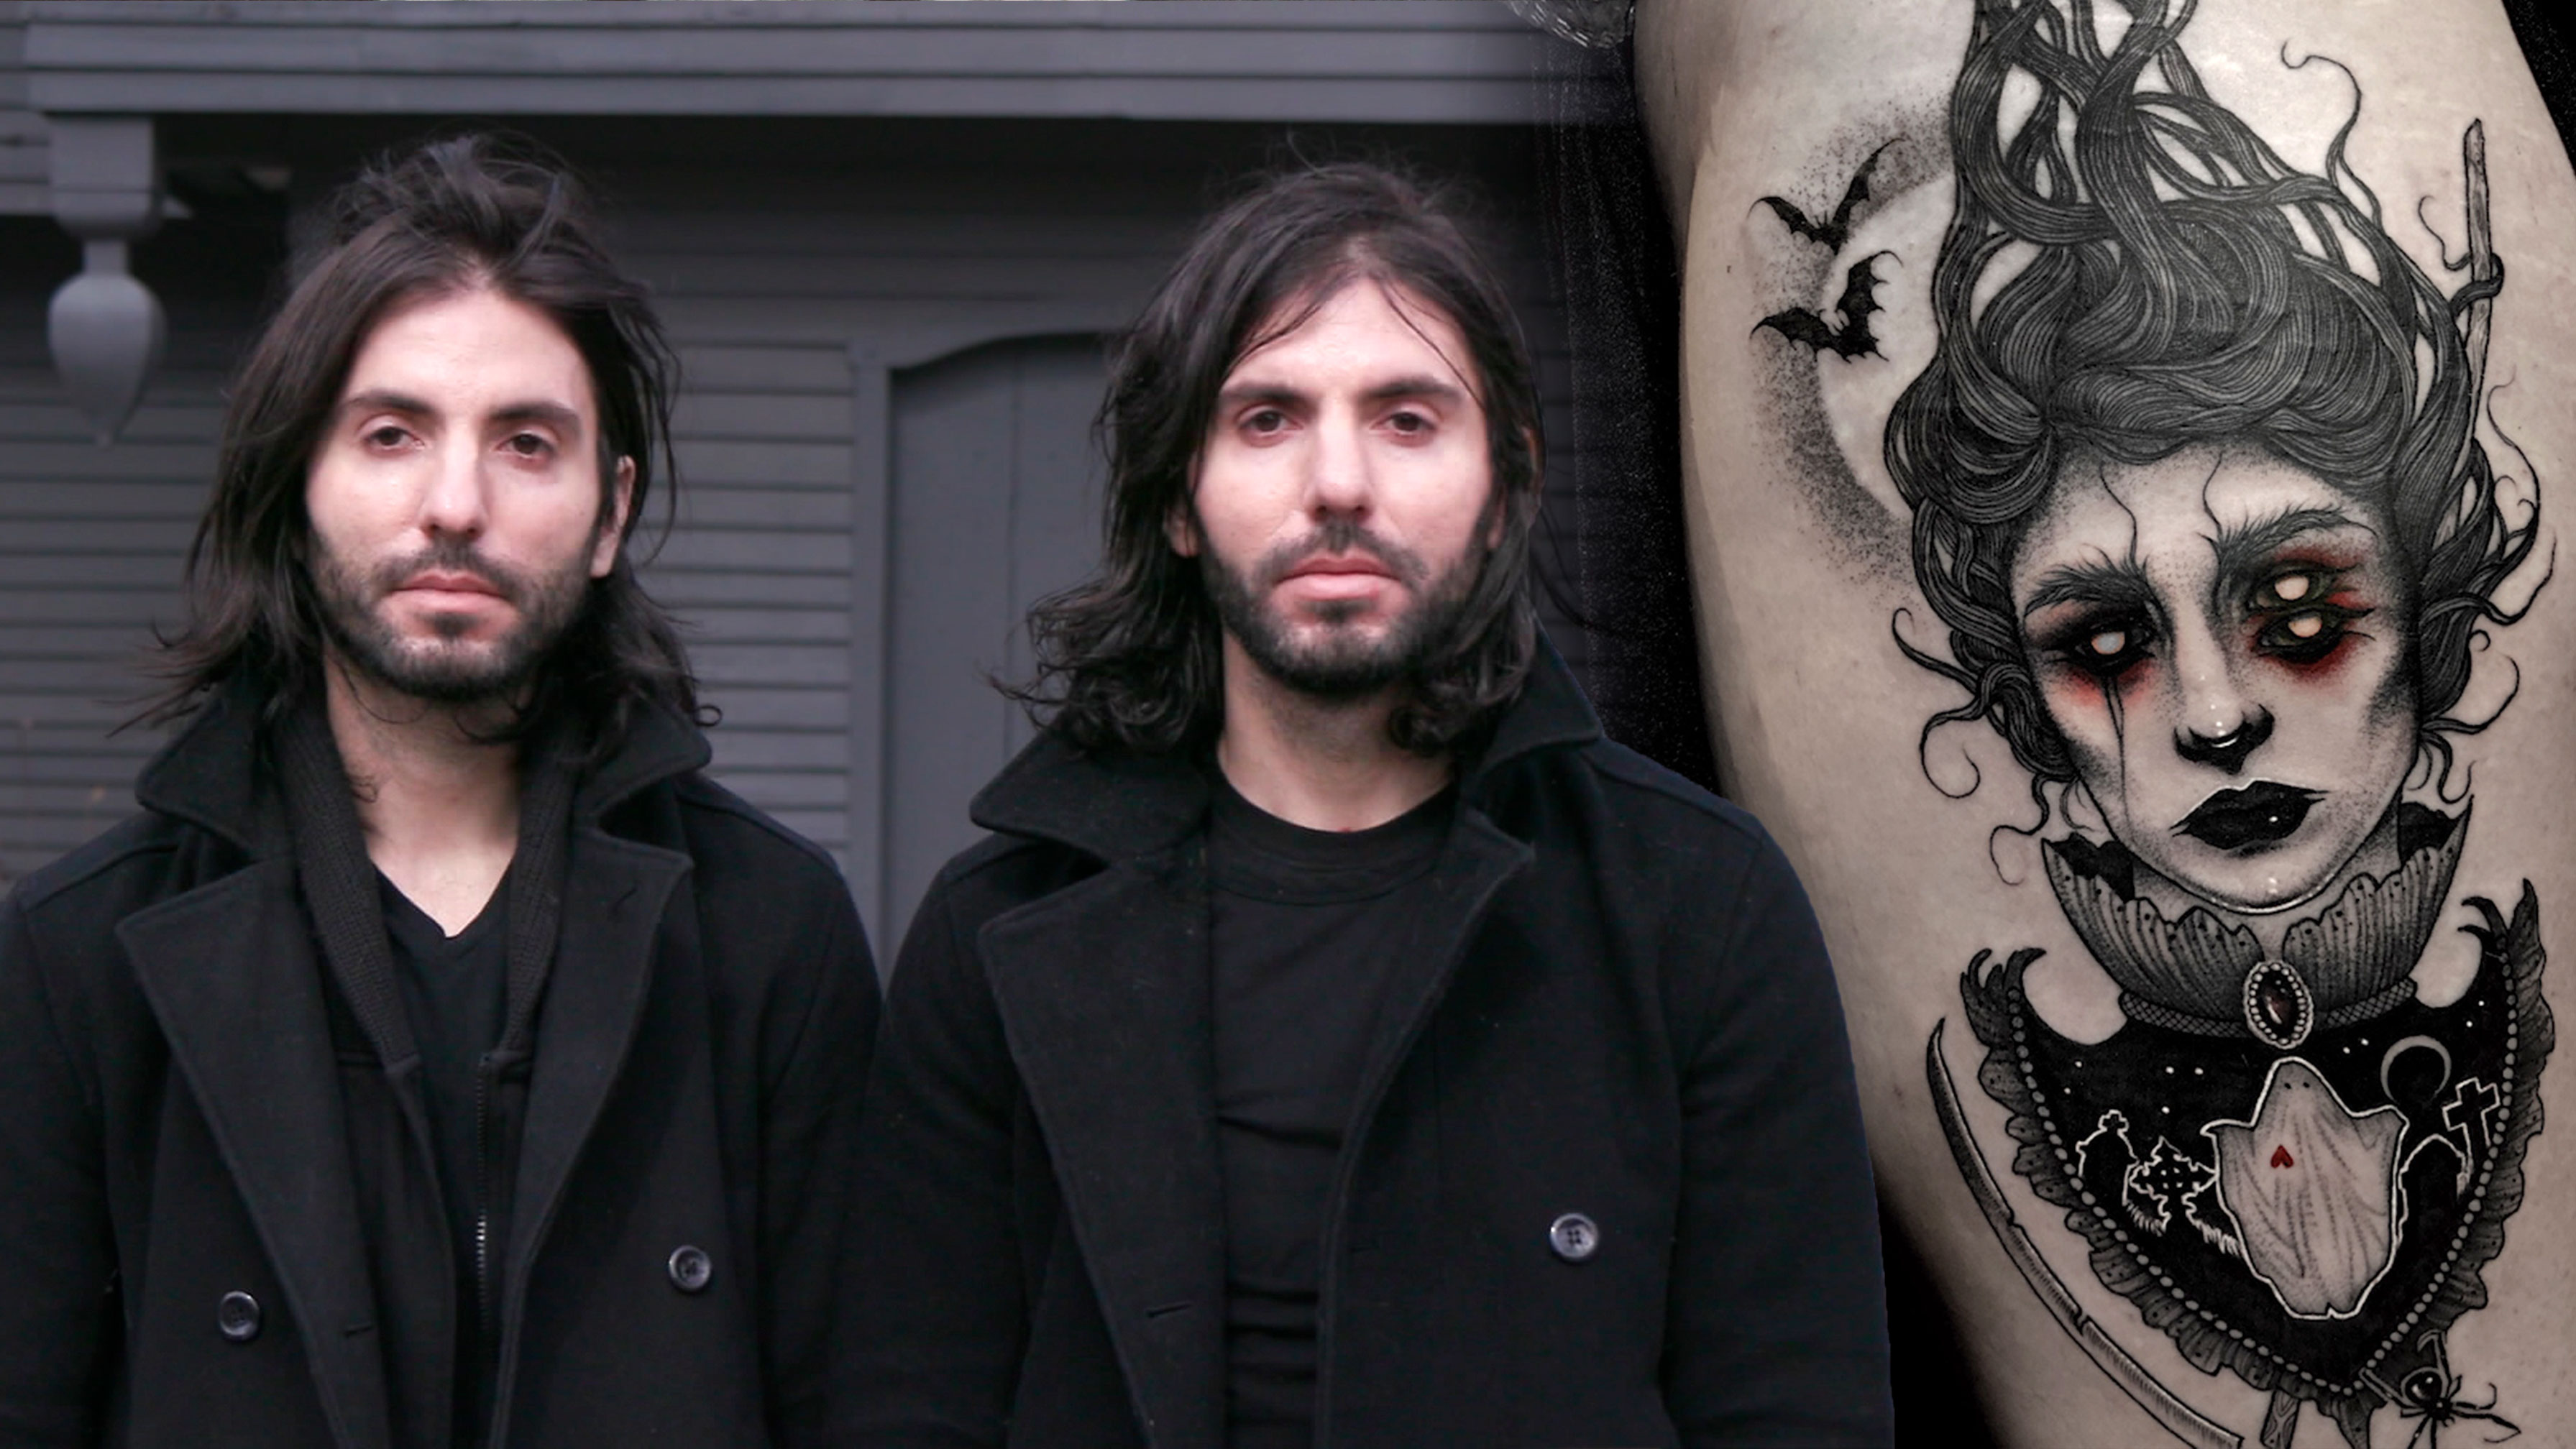 How the Salem Witch Trials Inspired These Twin Tattooists - VICE Video: Documentaries, Films, News Videos